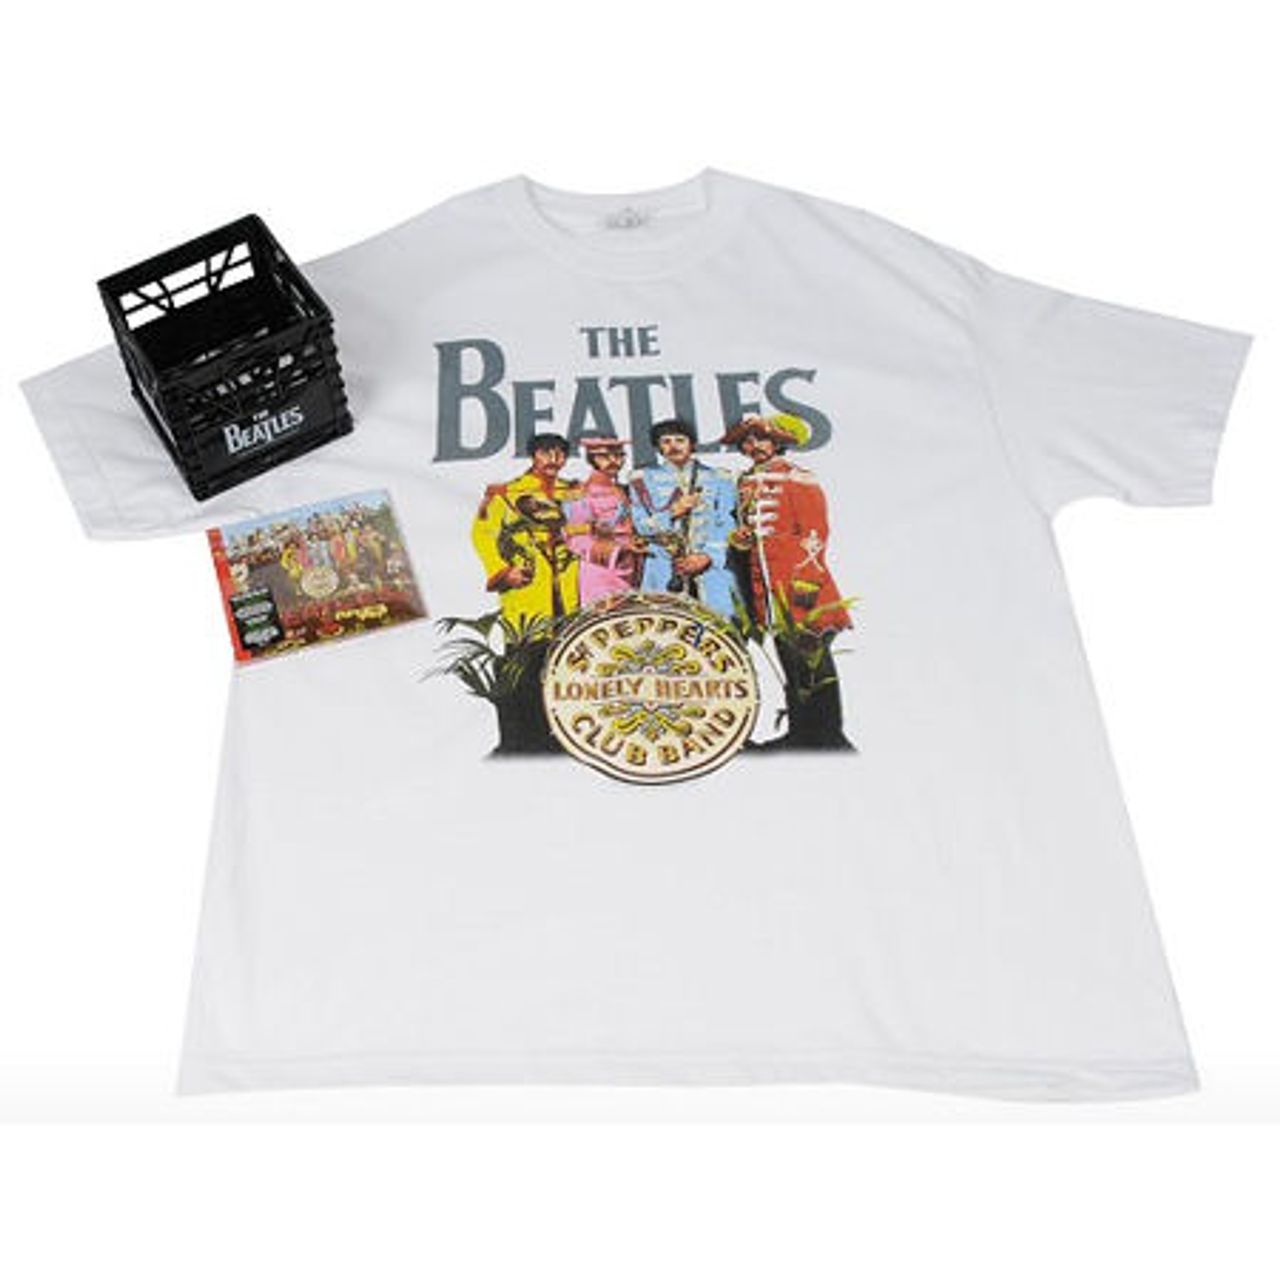 The Beatles Sgt. Pepper's Lonely Hearts Club Band [White T-Shirt] Cana —